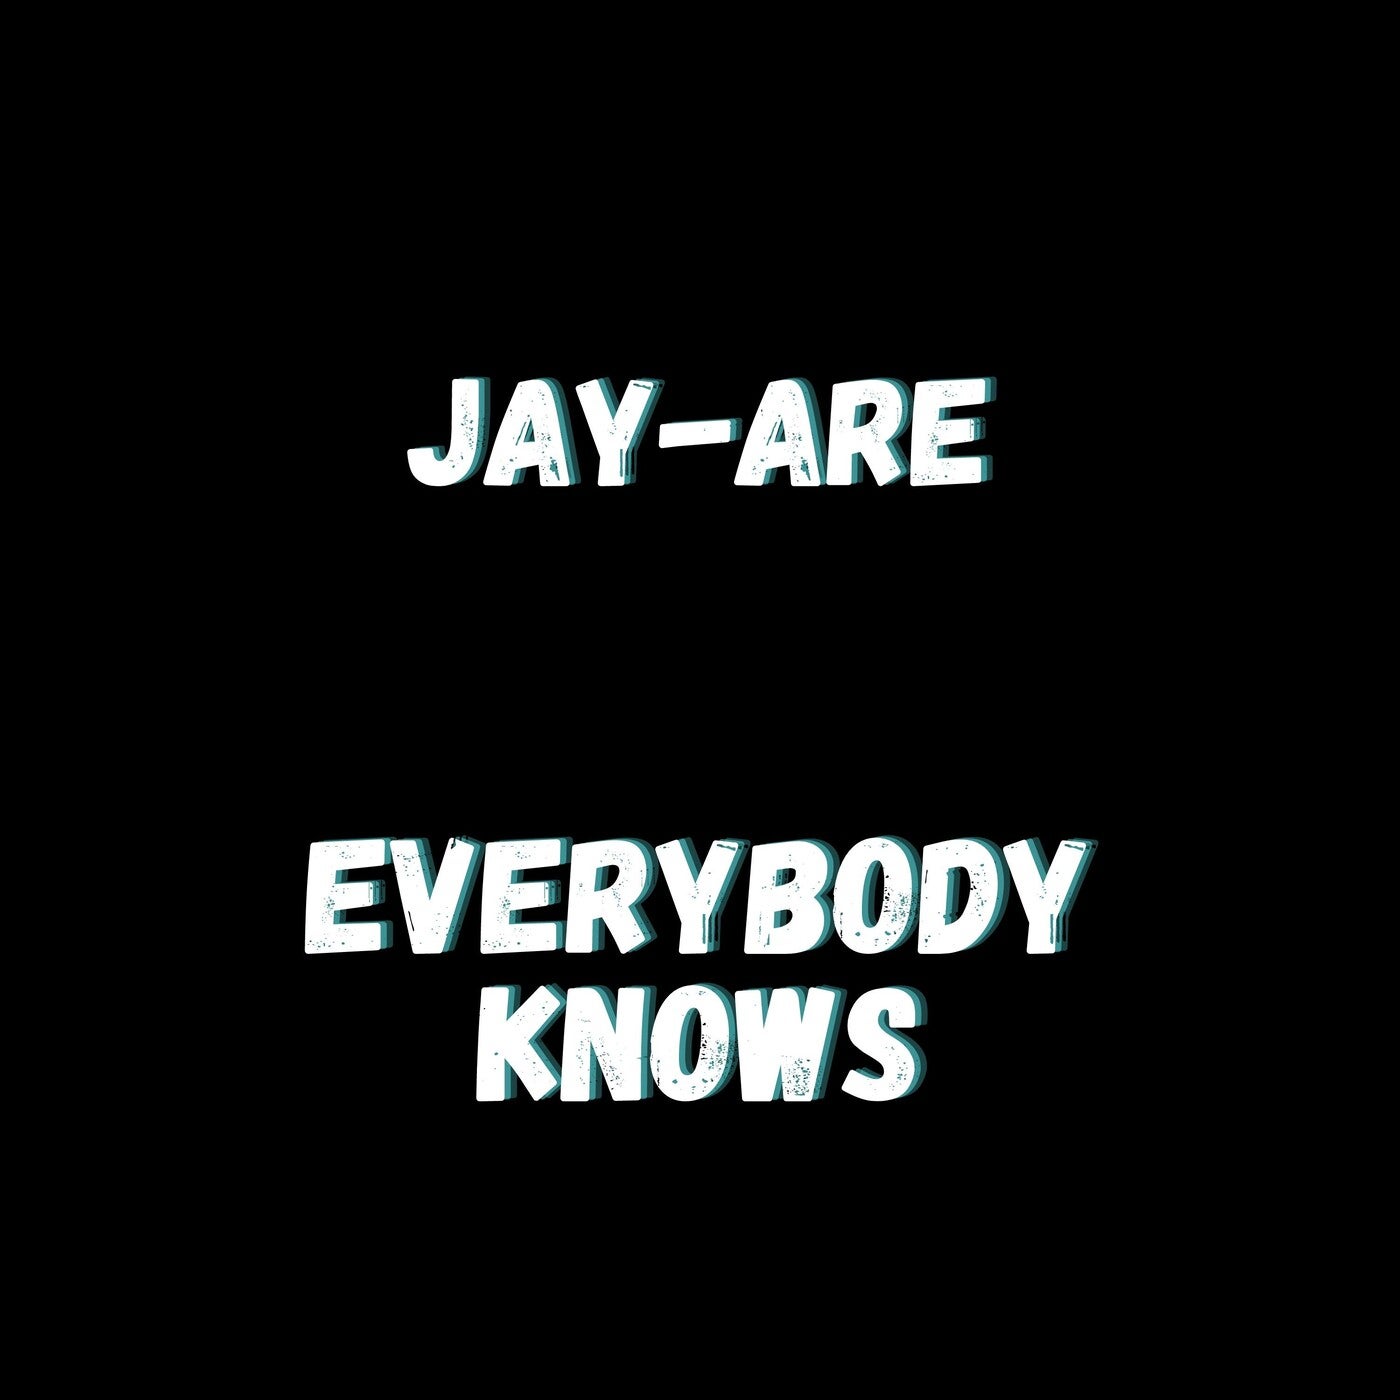 Everybody Knows